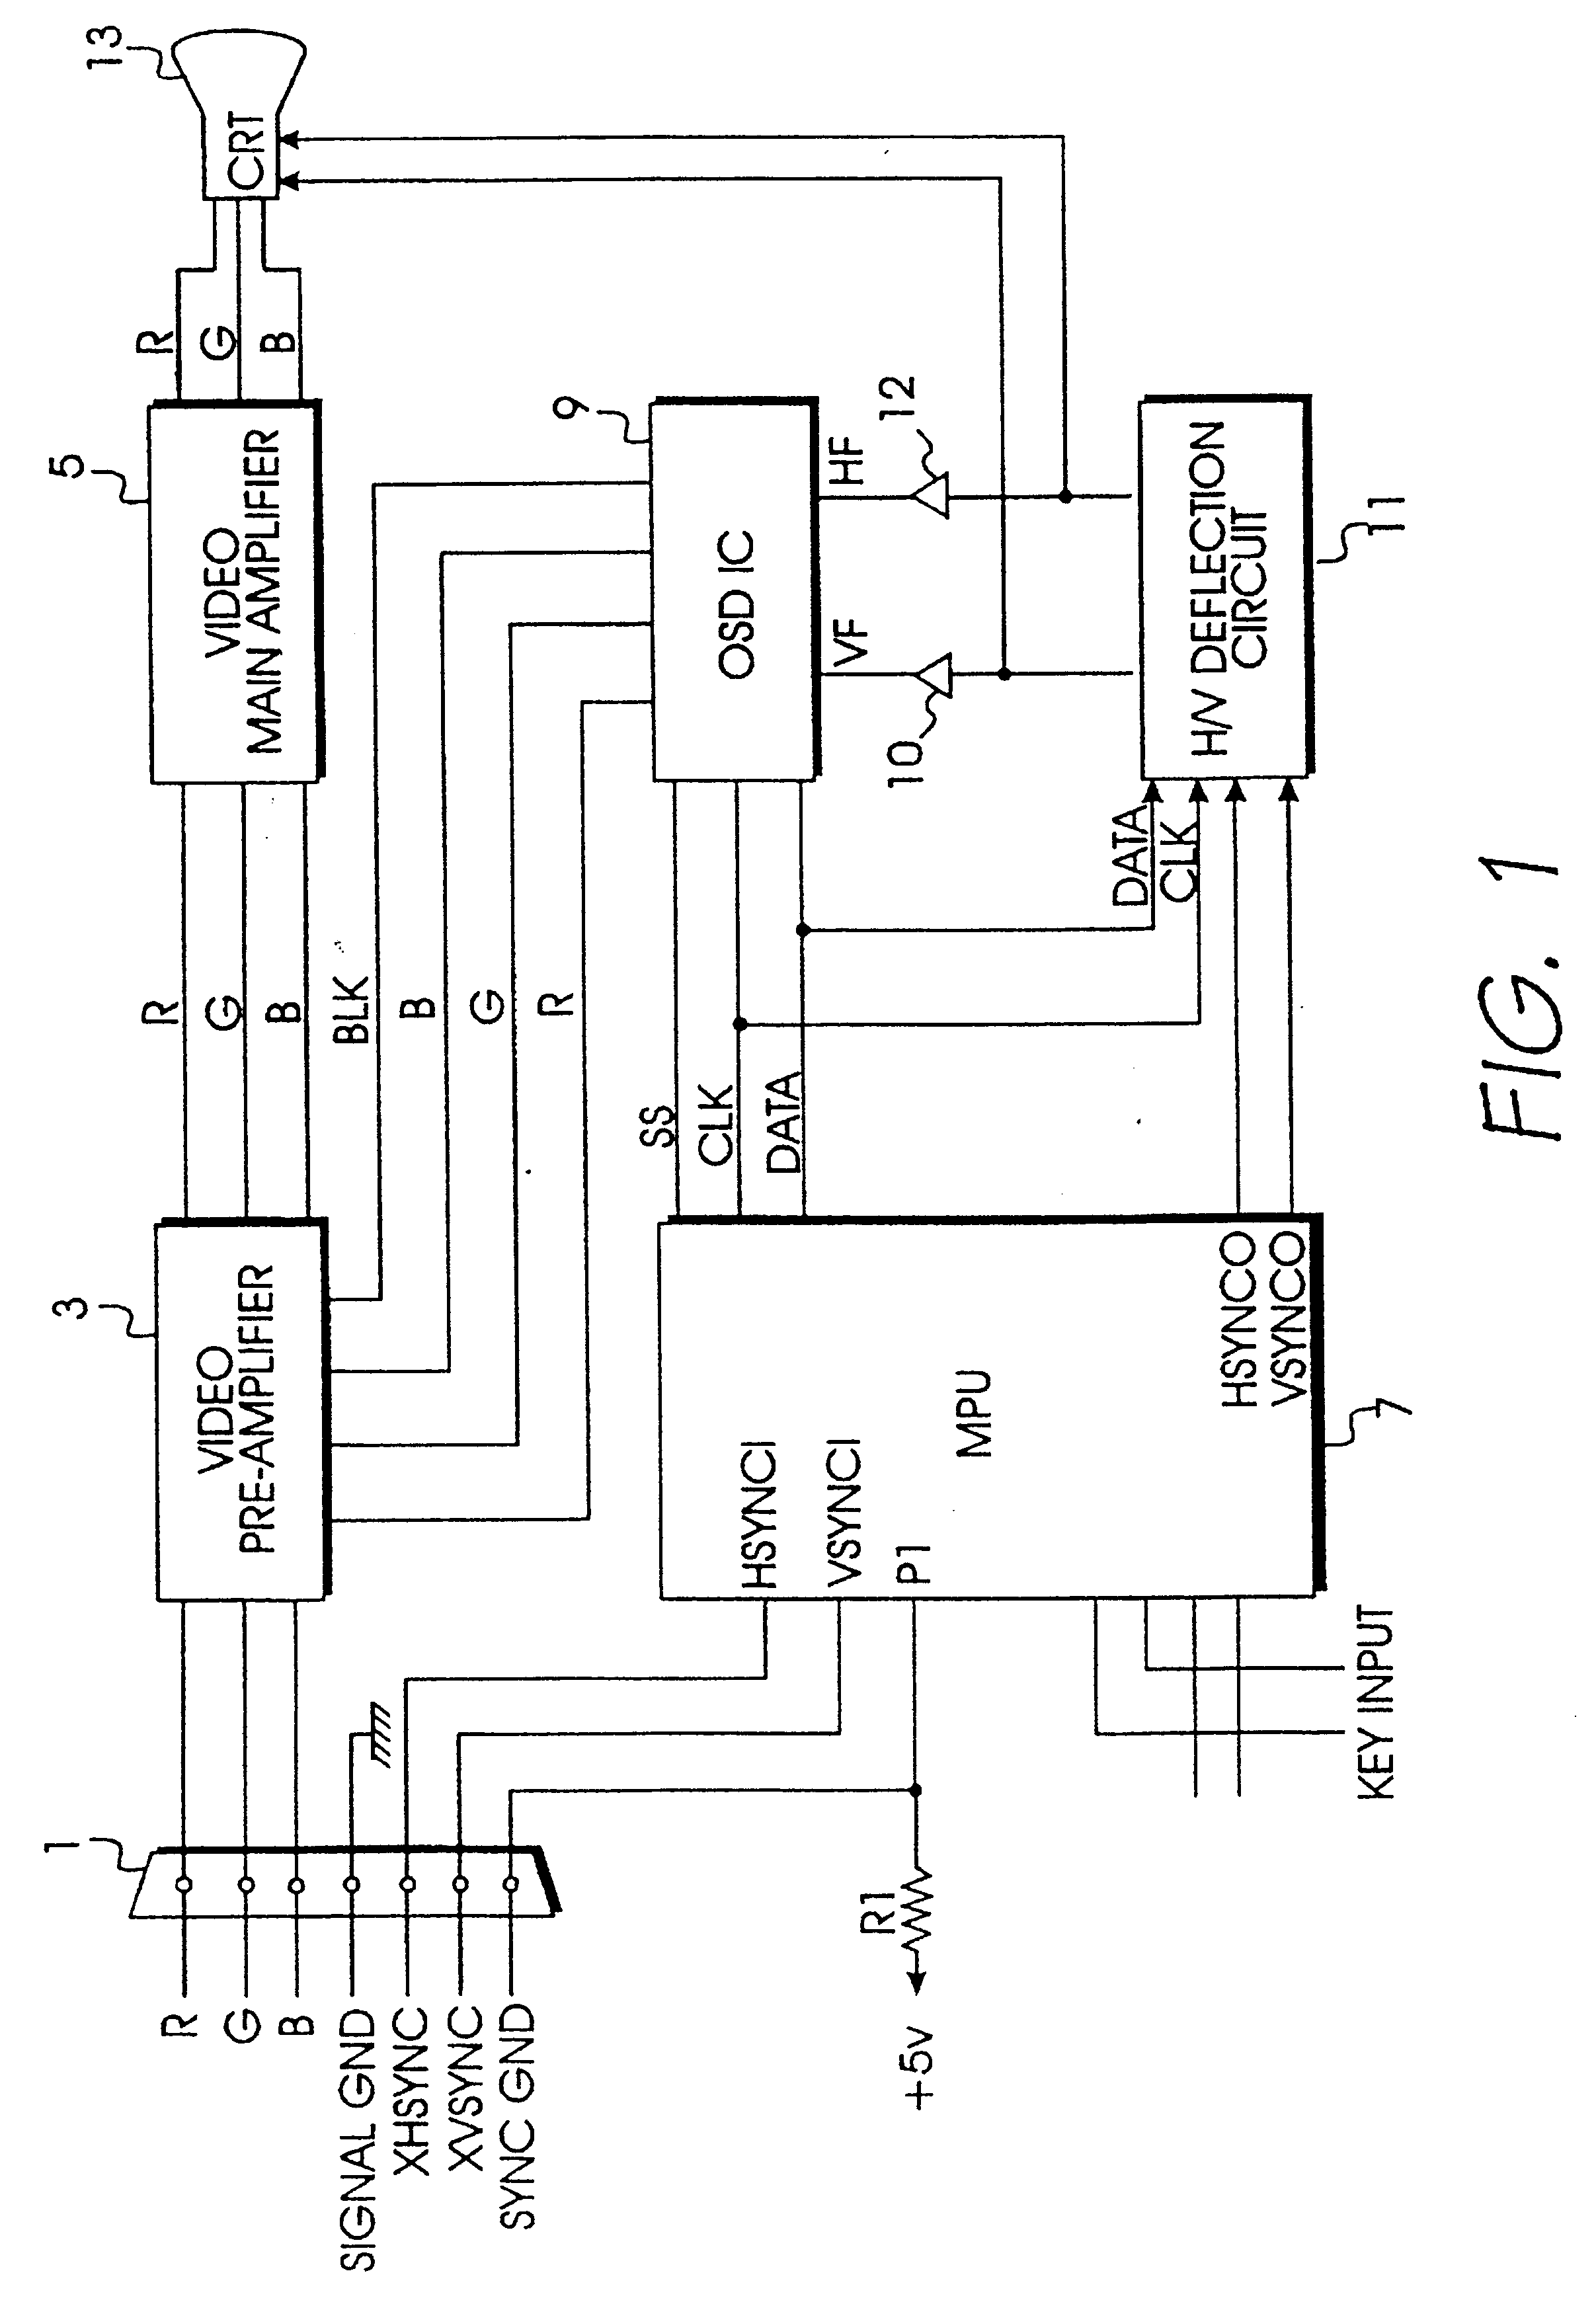 Self-diagnosis arrangement for a video display and method of implementing the same